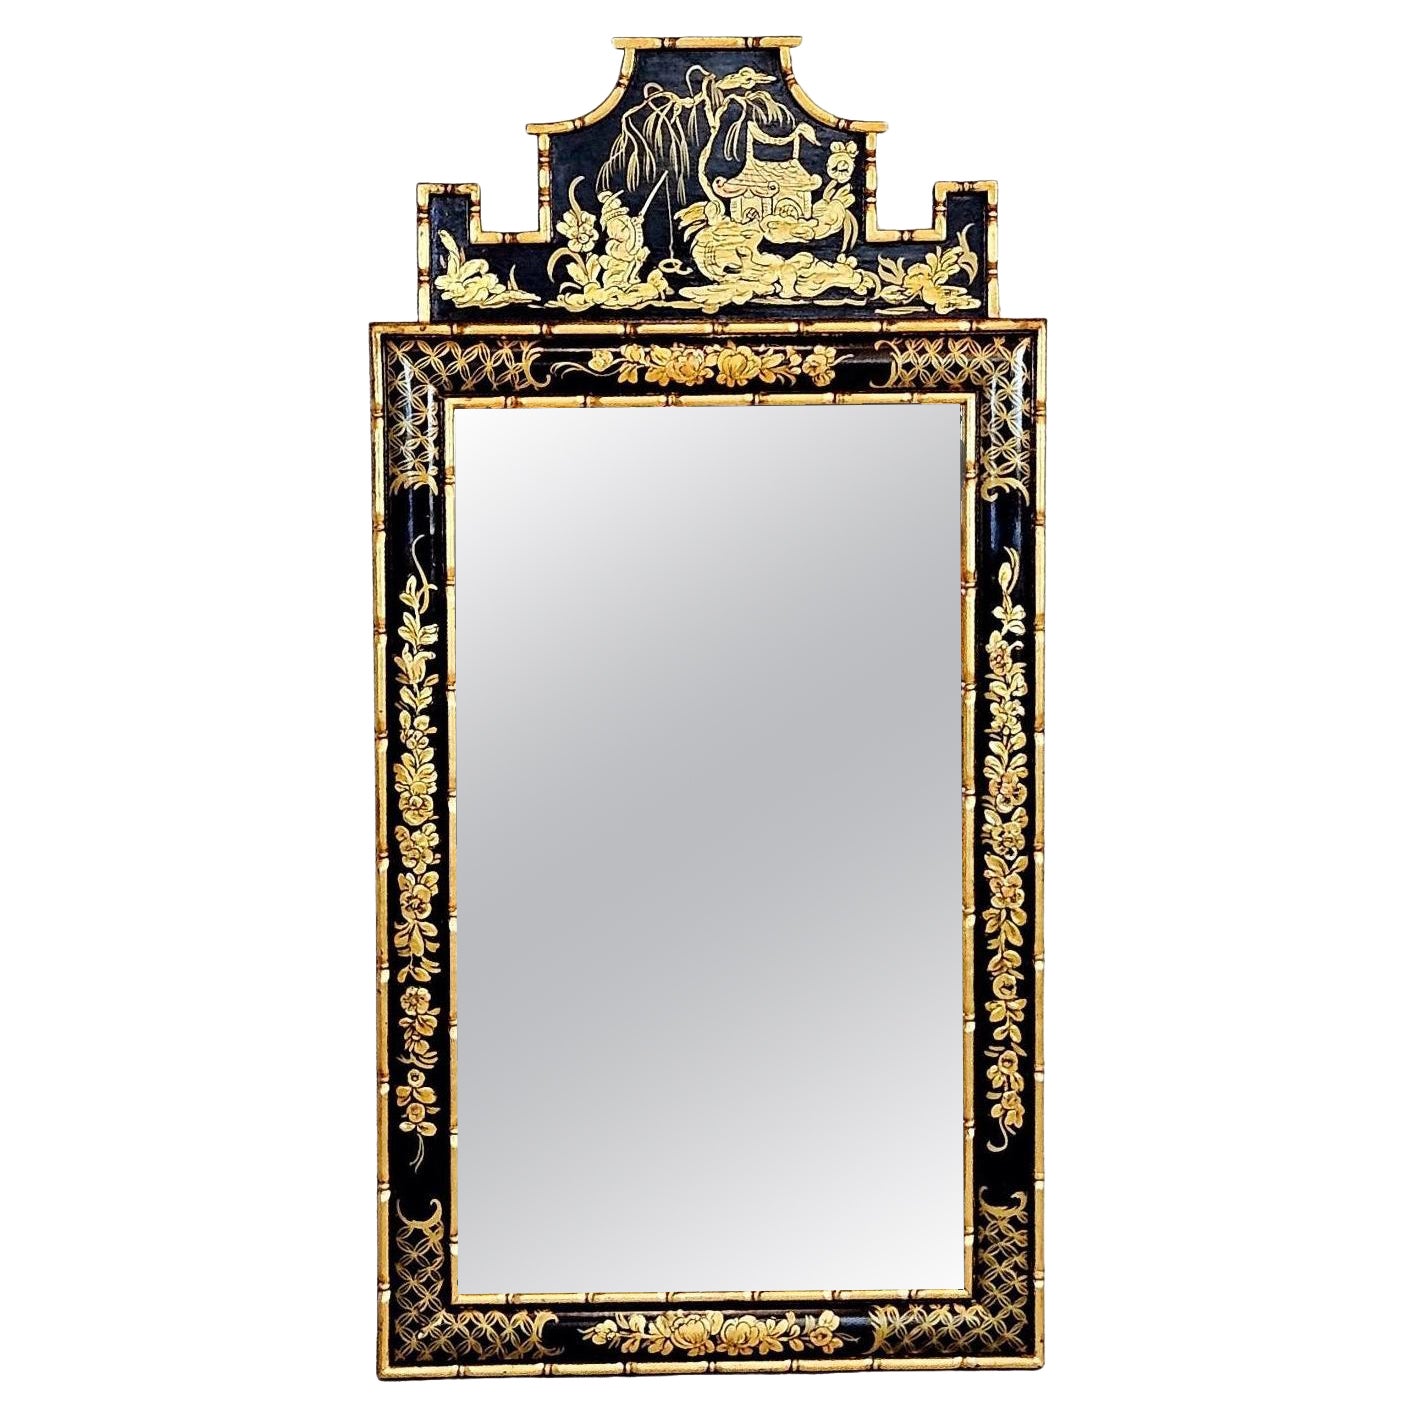 18th Century Style Chinoiserie Black Lacquer Mirror Frame with Gold Accents For Sale